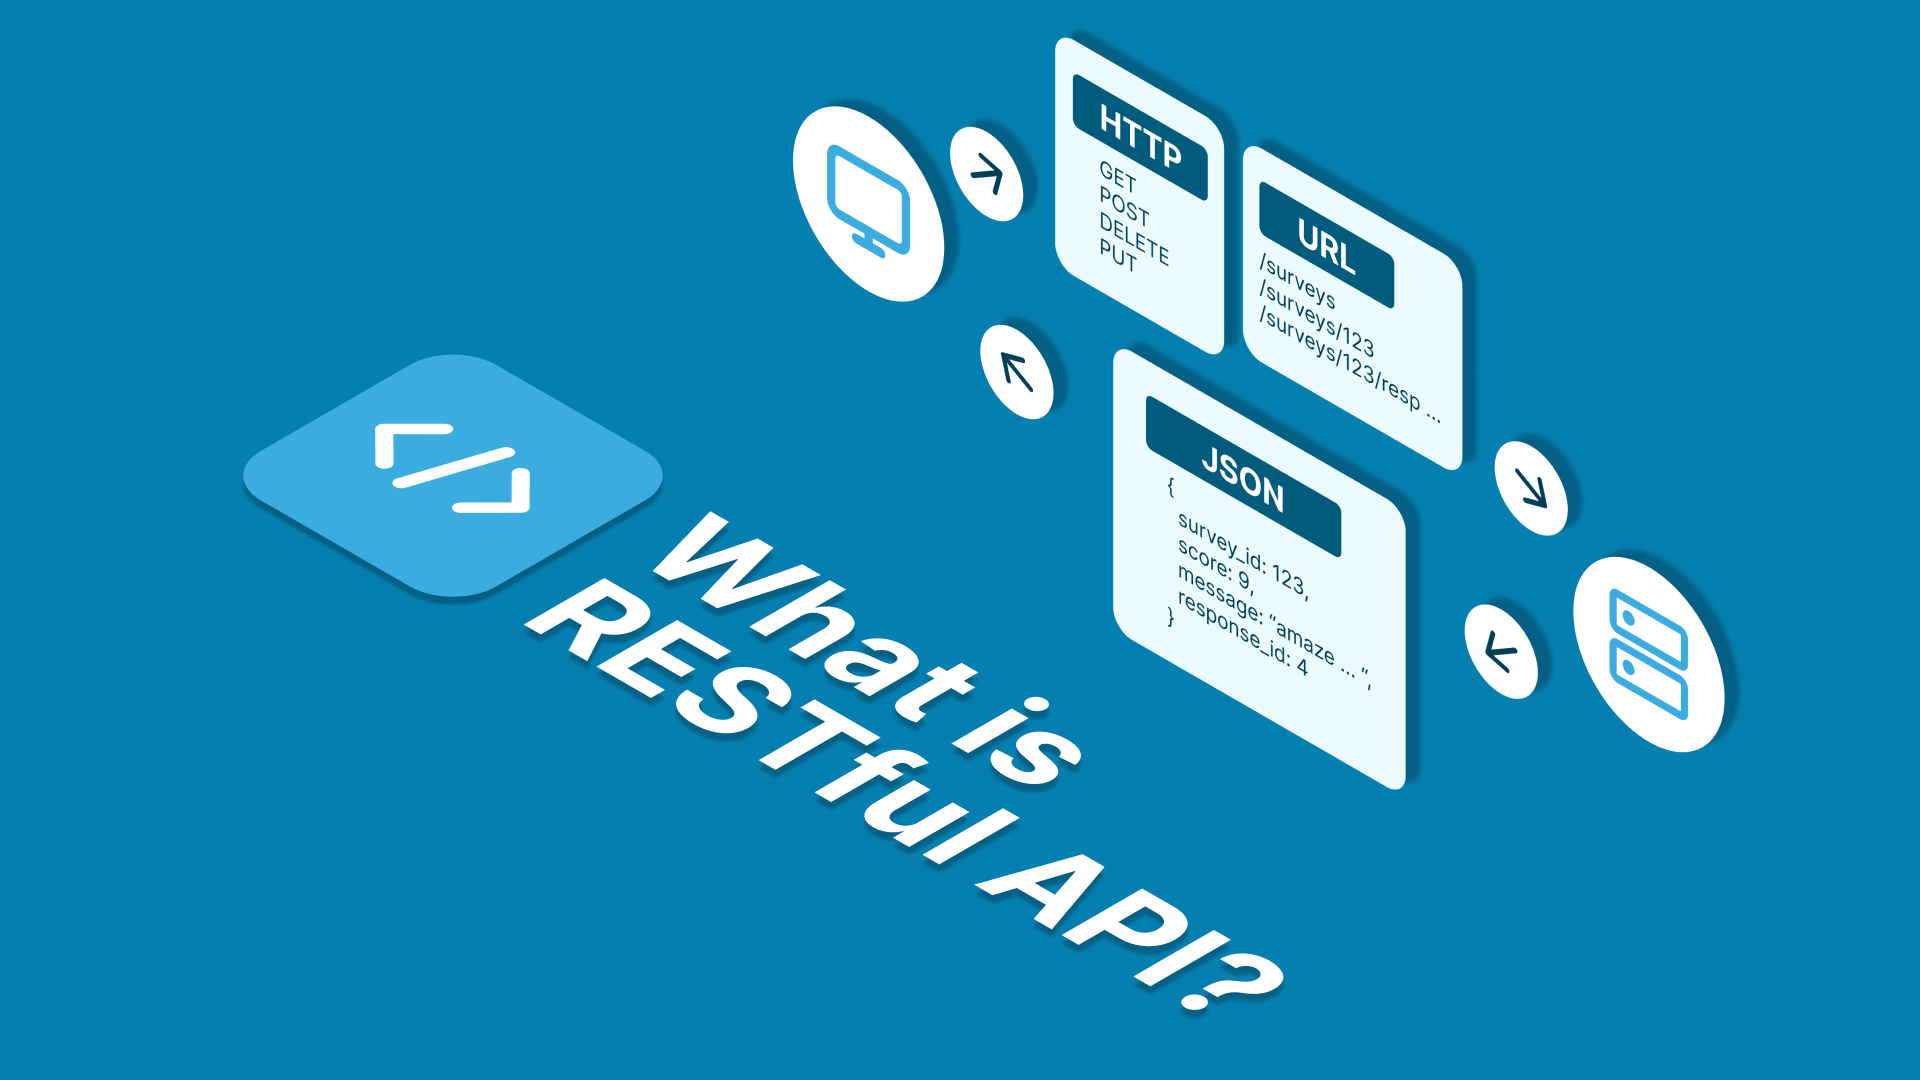 Cover image for the blog article titled 'What is RESTful API?'